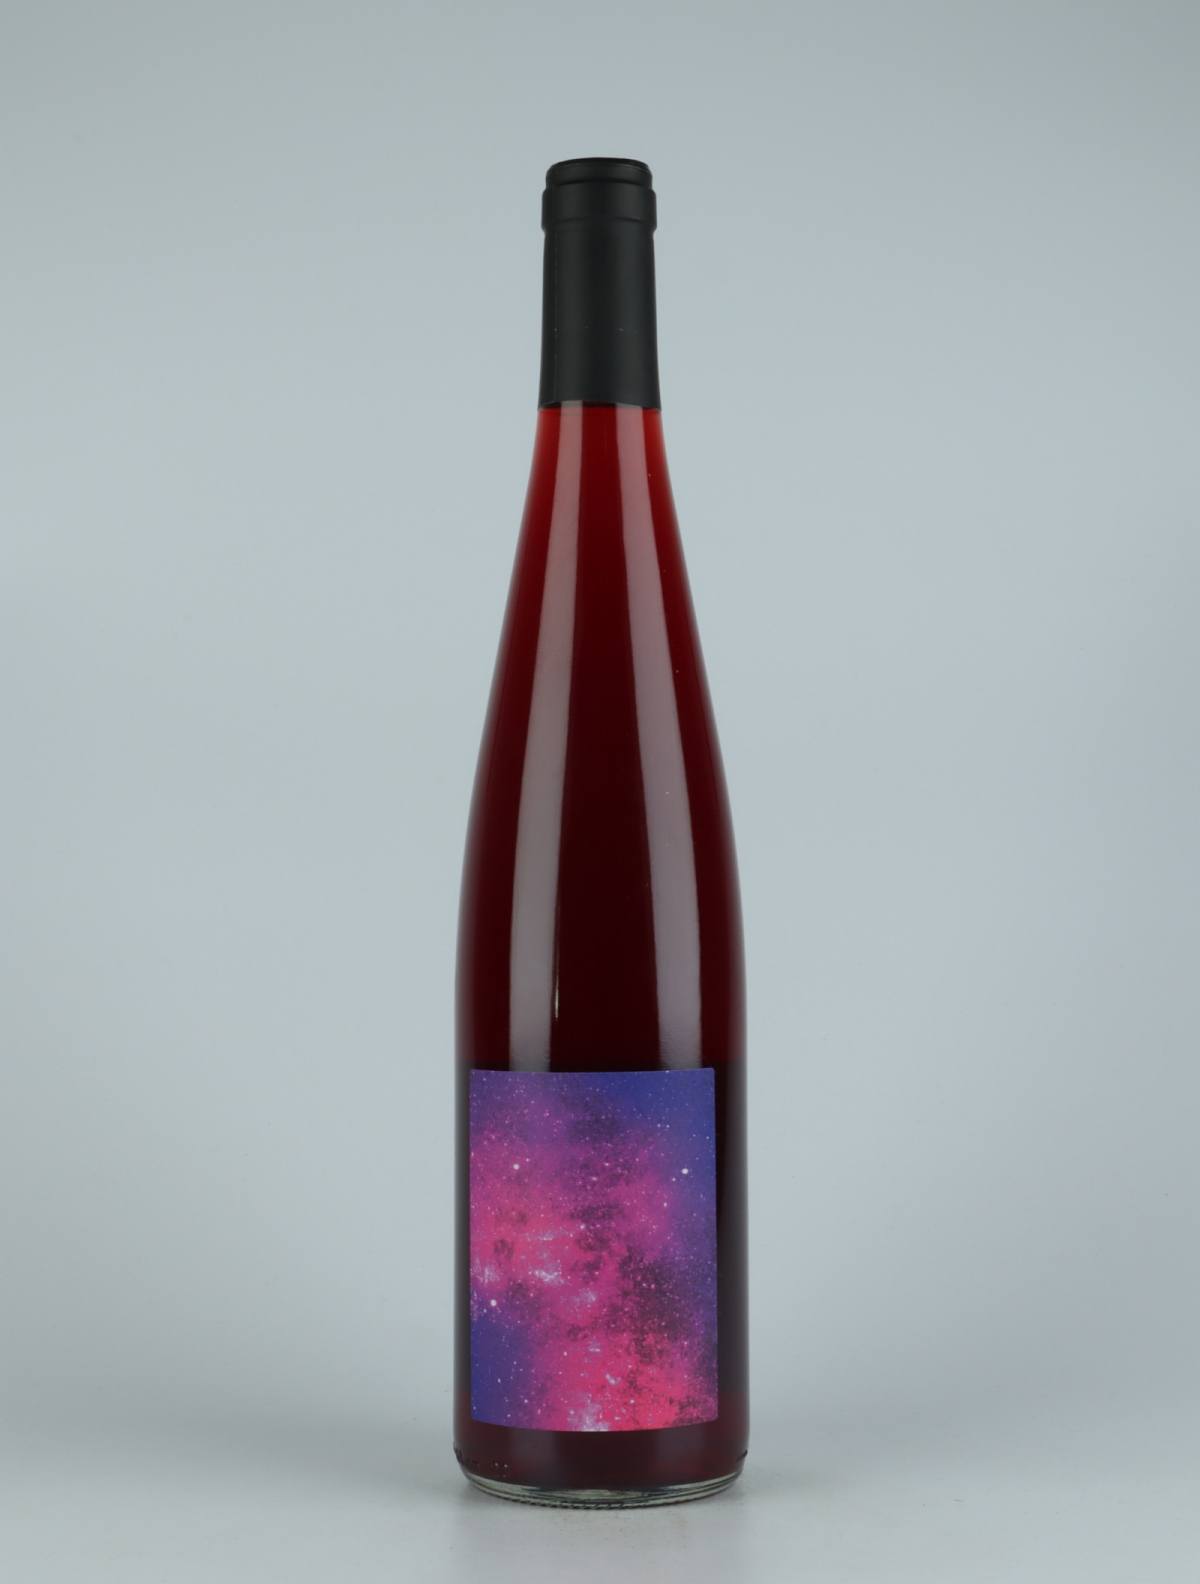 A bottle 2020 Ultra Violet Red wine from Les Vins Pirouettes, Alsace in France